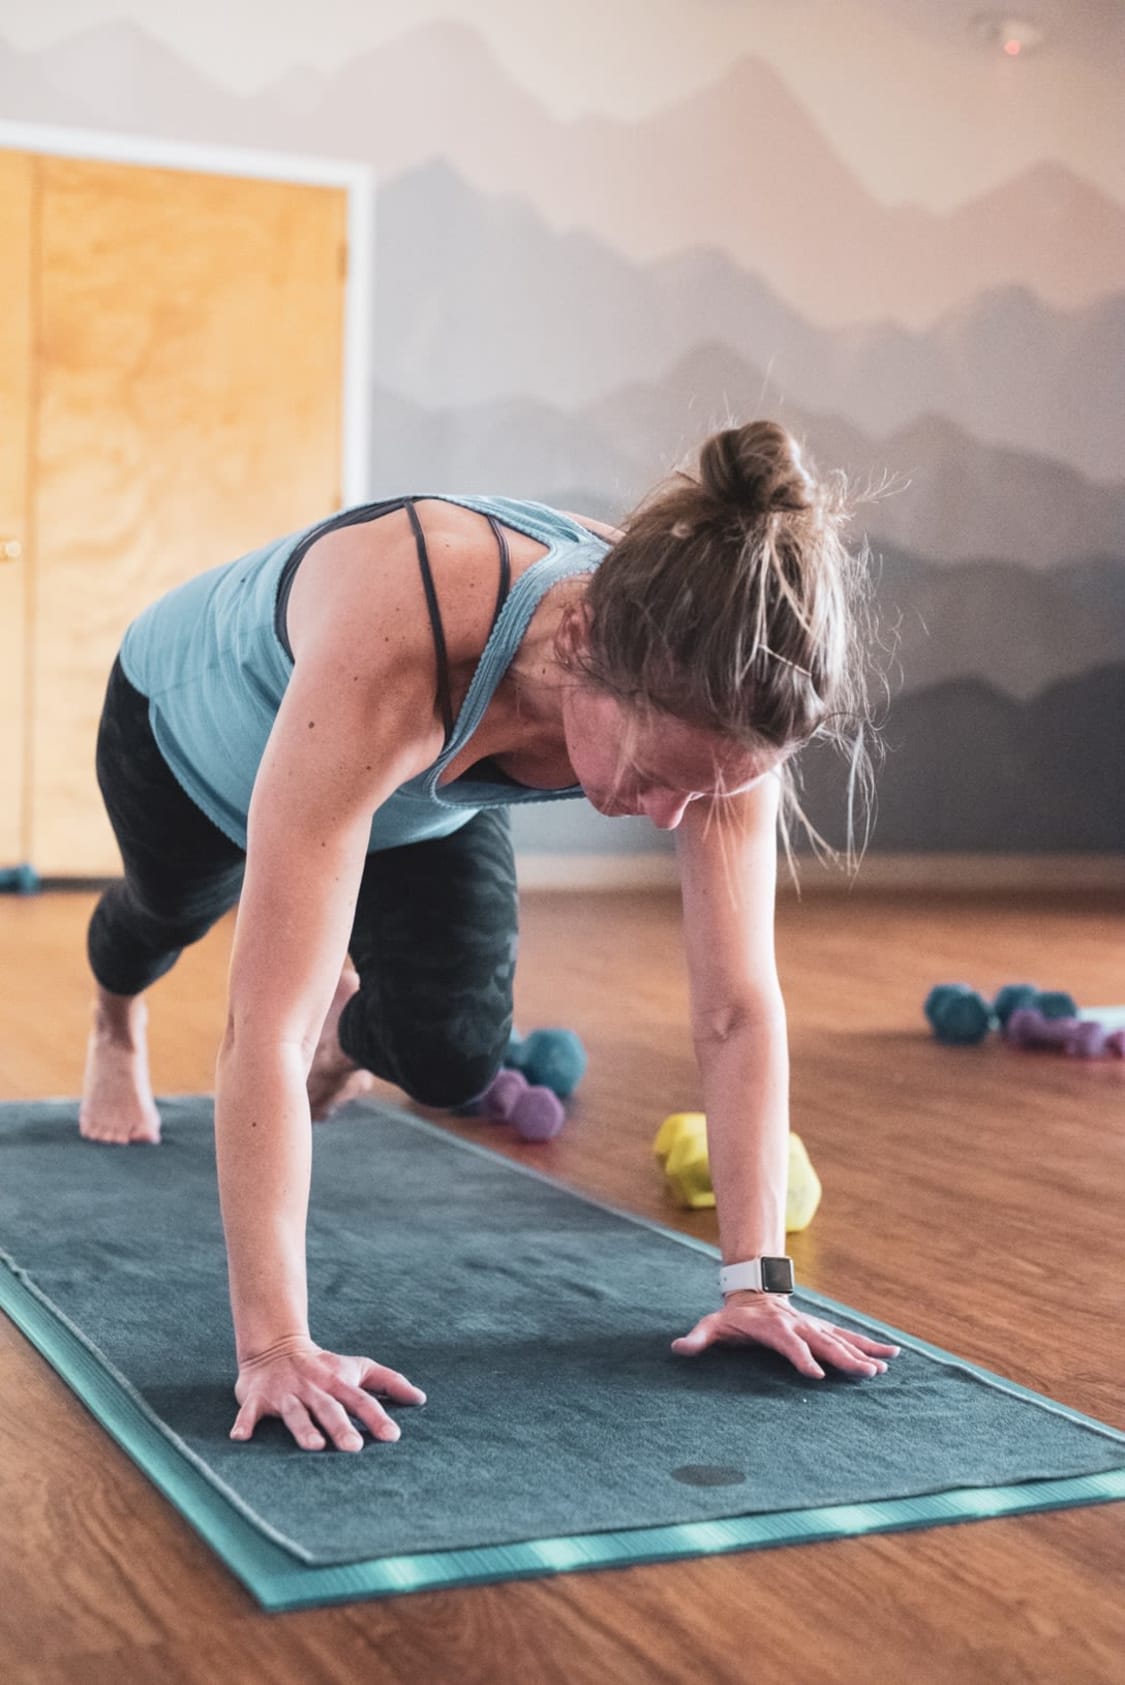 Flow Yoga Studio: Read Reviews and Book Classes on ClassPass